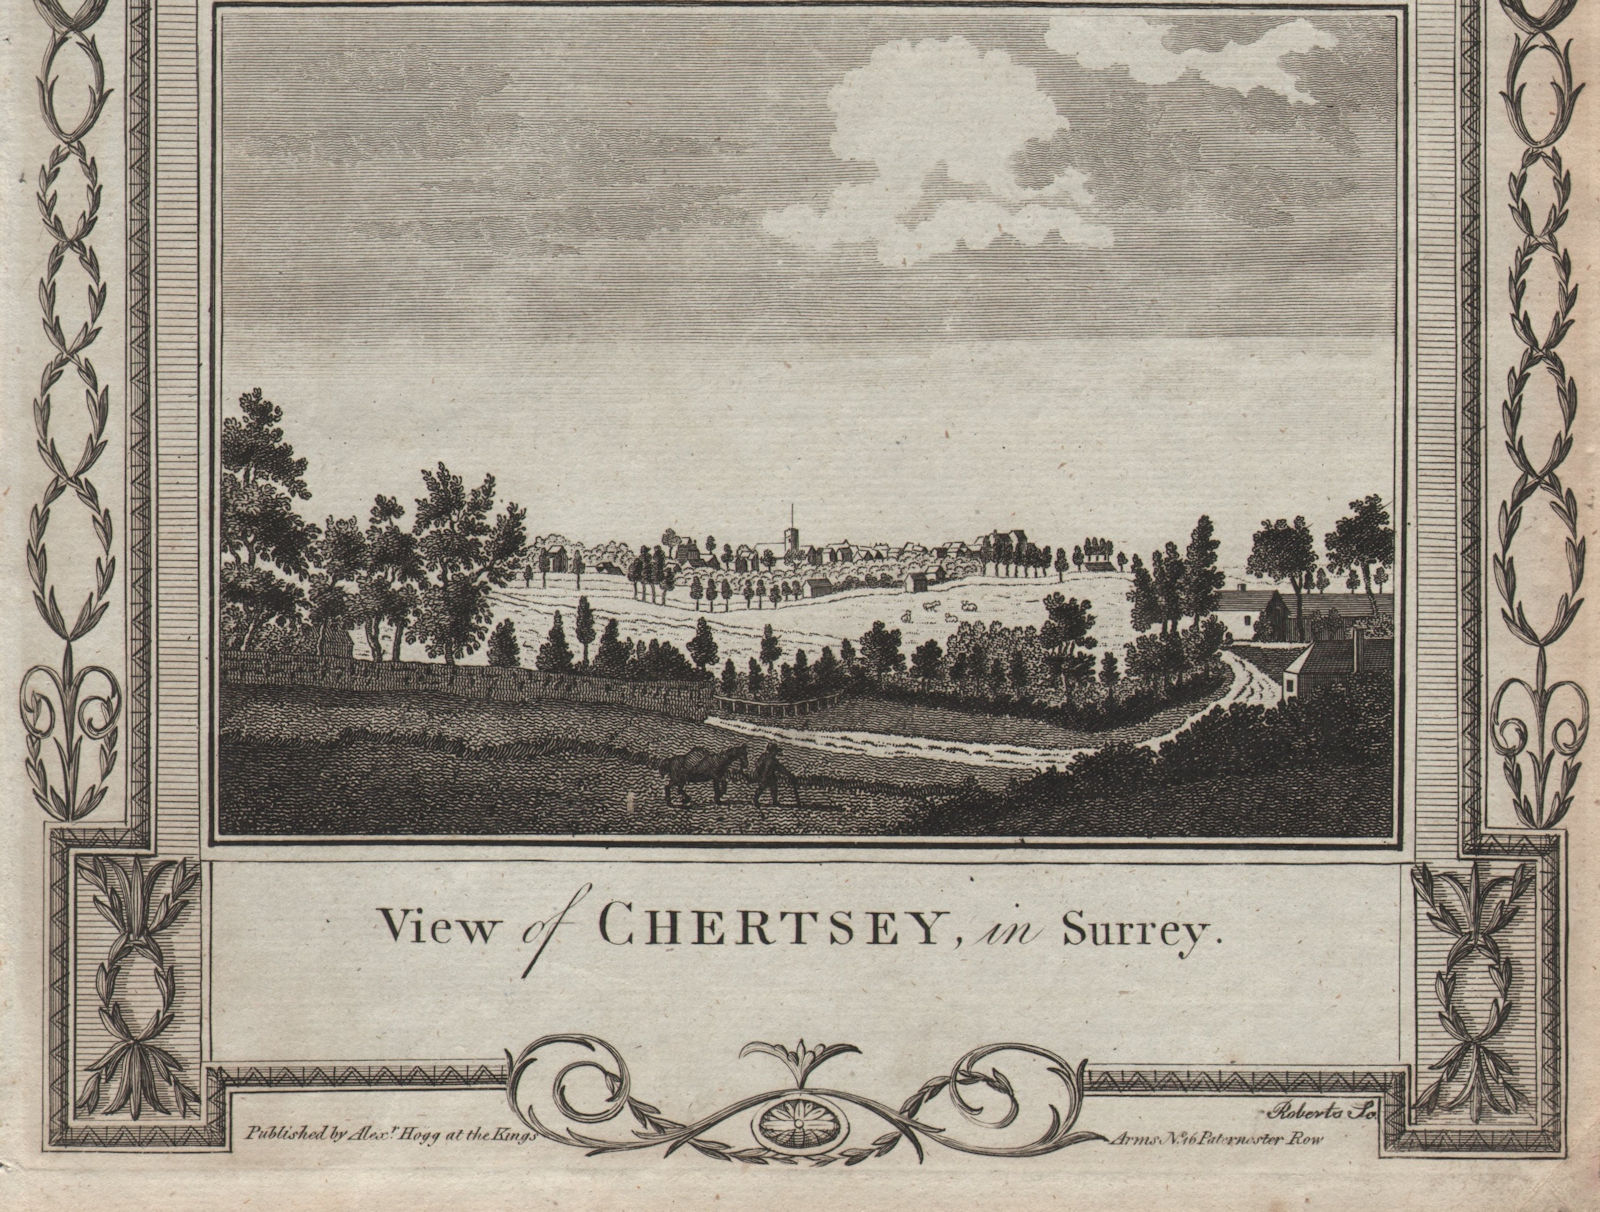 Associate Product View of Chertsey, Surrey, with St Peter's church. THORNTON 1784 old print